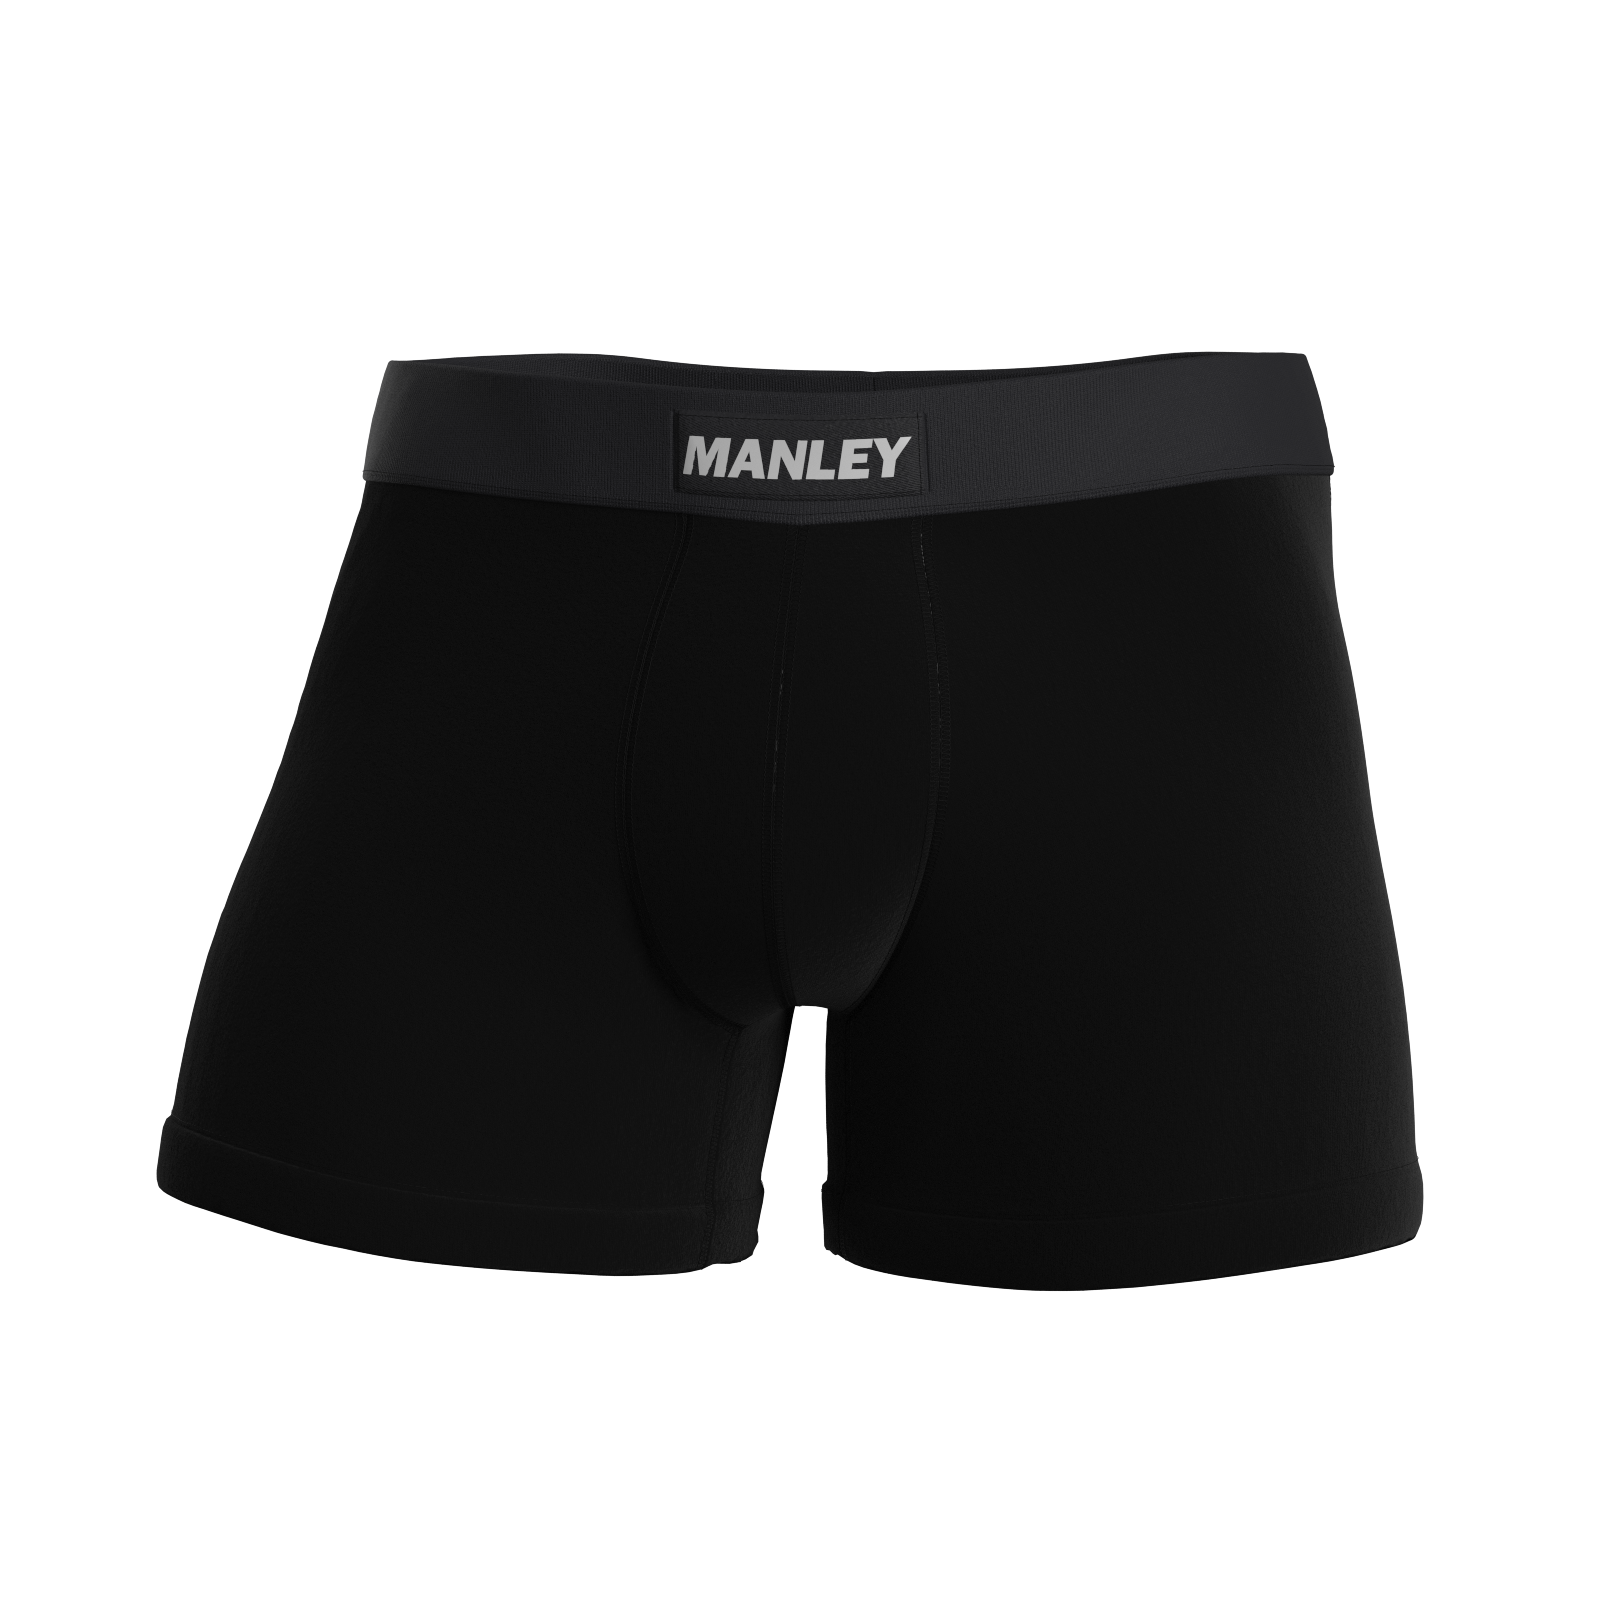 Comfortable Underwear that Stops the Pee Spot. – Manley Barrier Apparel